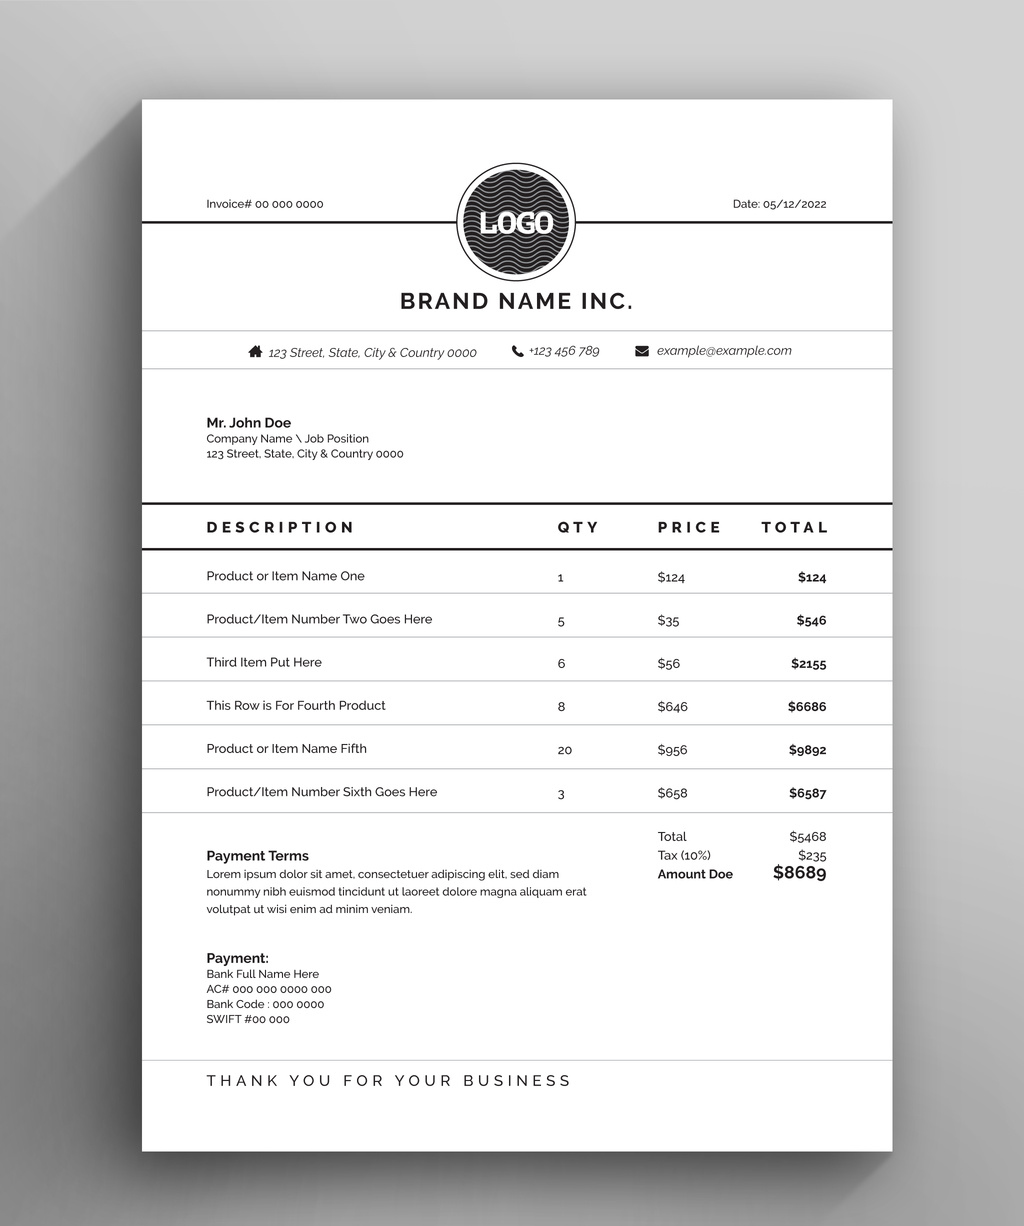 Printable Invoice Layout (AI Format)